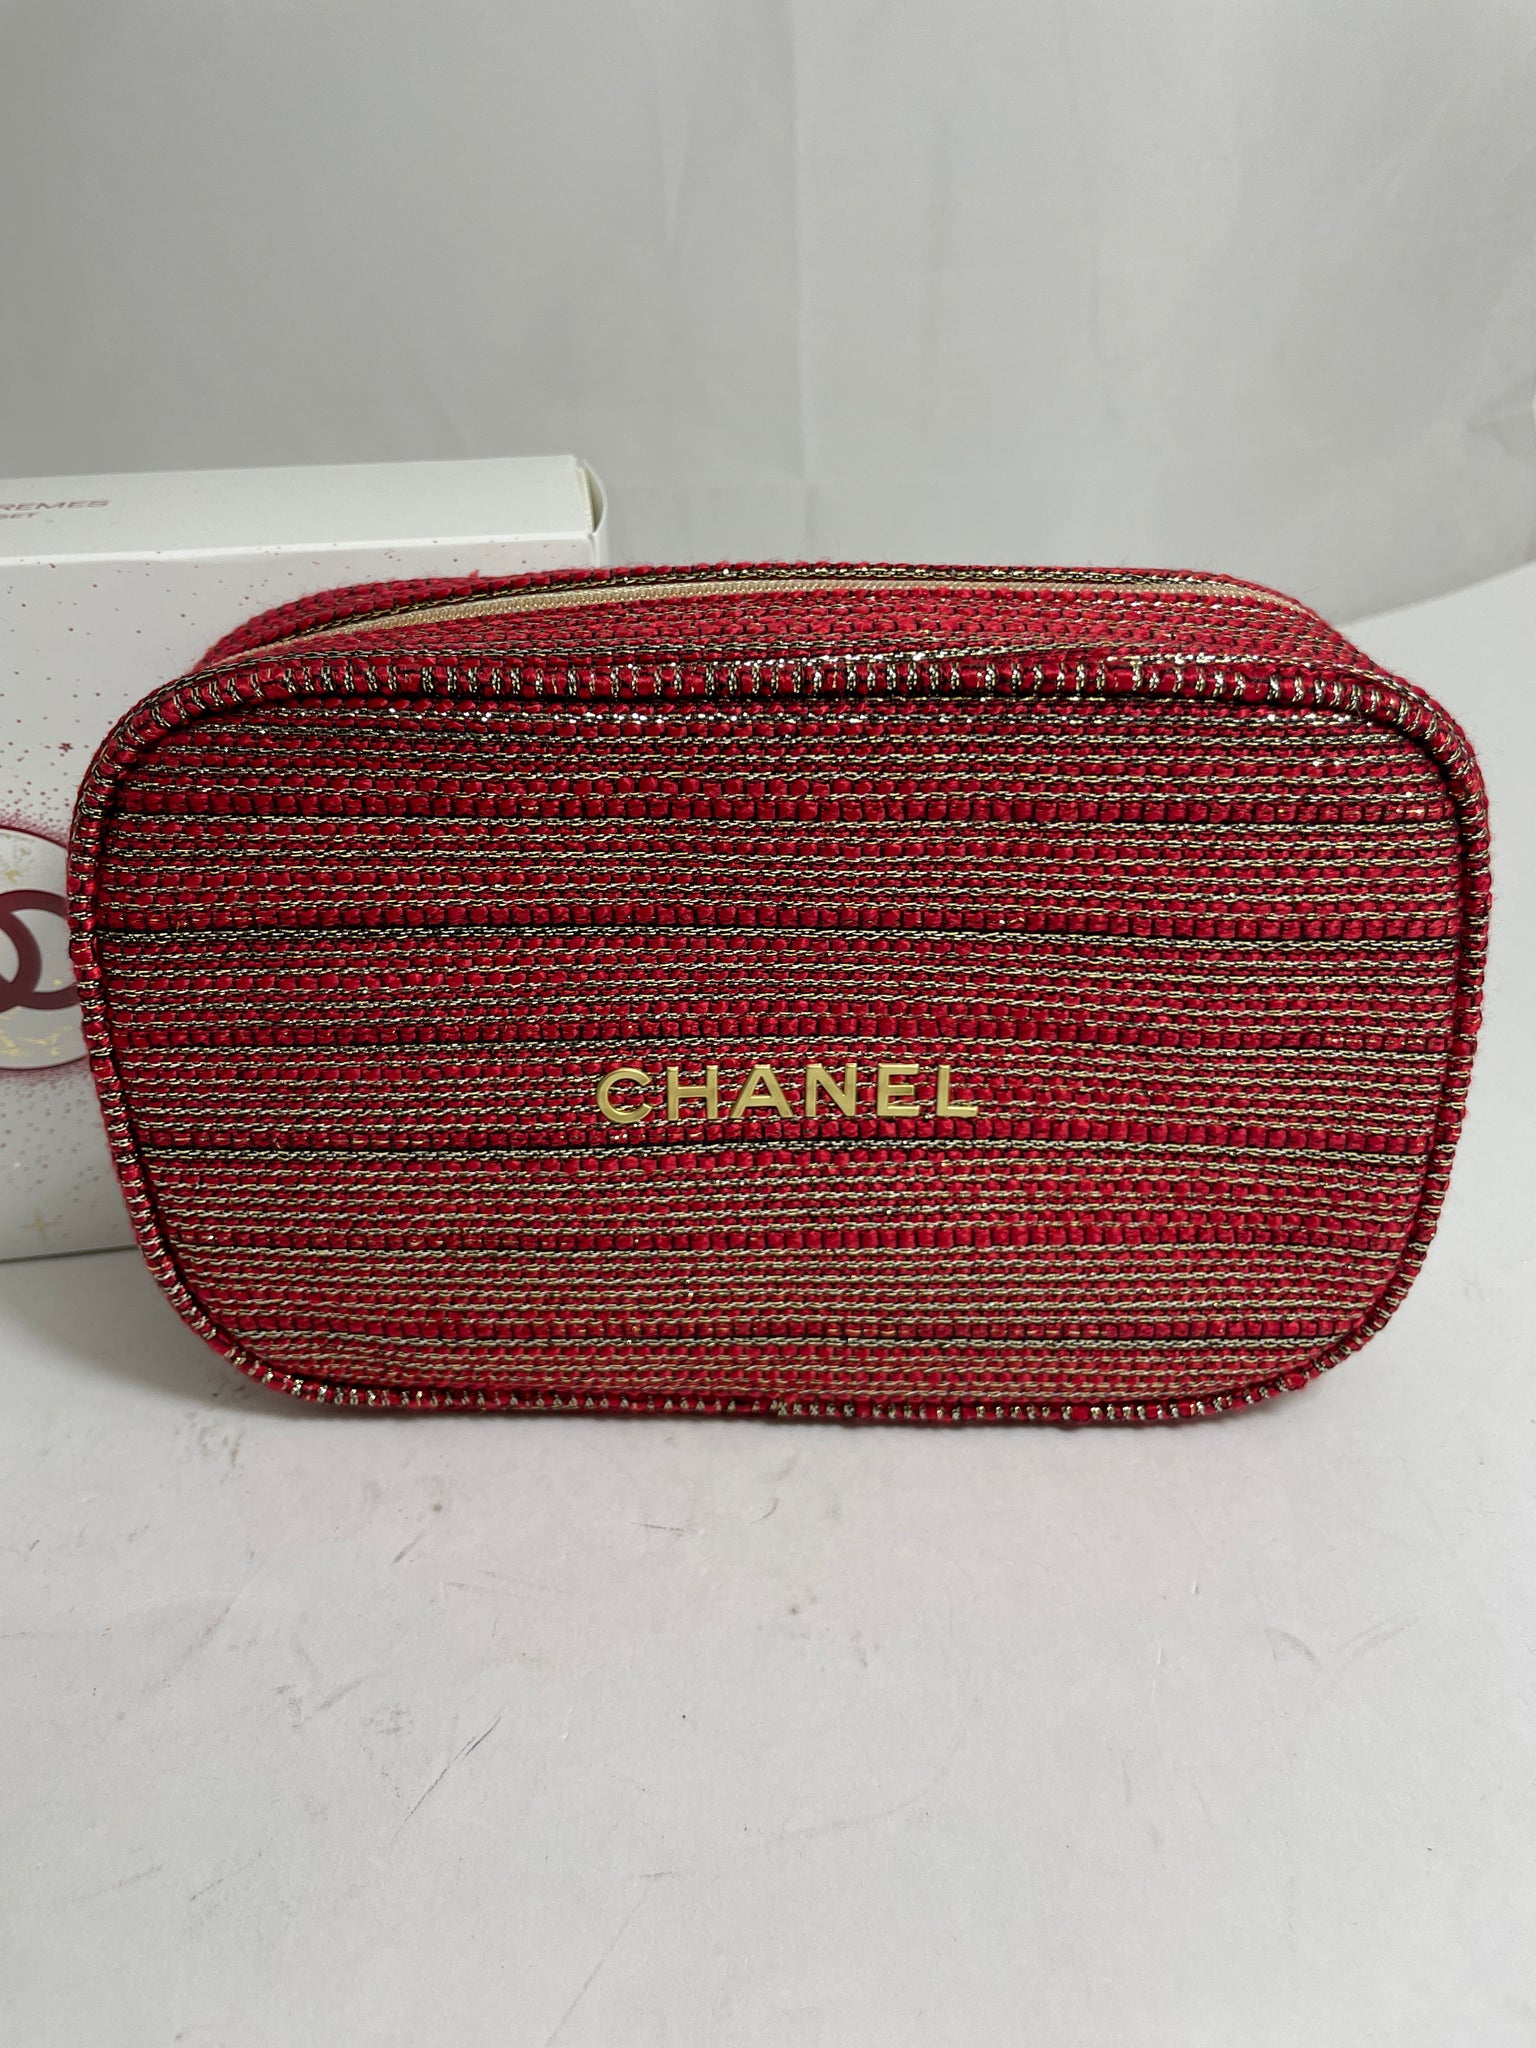 CHANEL HOLIDAY GIFT SETS 2022! NEW CHANEL BEAUTY TWEED MAKEUP BAGS